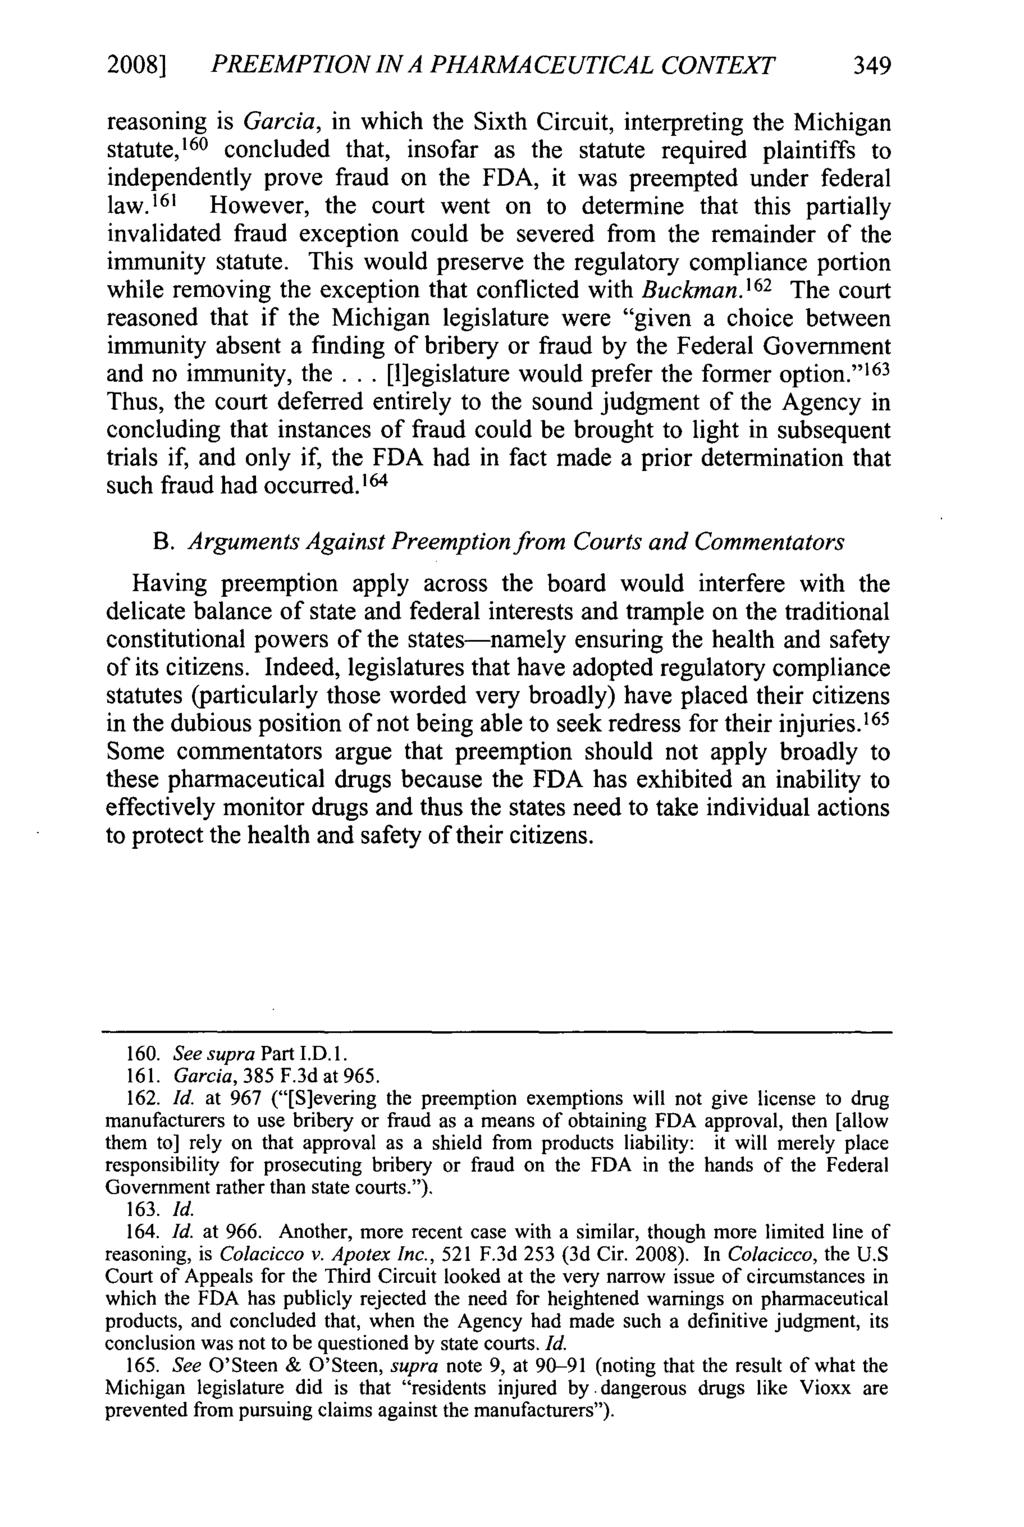 2008] PREEMPTION IN A PHARMACEUTICAL CONTEXT 349 reasoning is Garcia, in which the Sixth Circuit, interpreting the Michigan statute, 1 60 concluded that, insofar as the statute required plaintiffs to